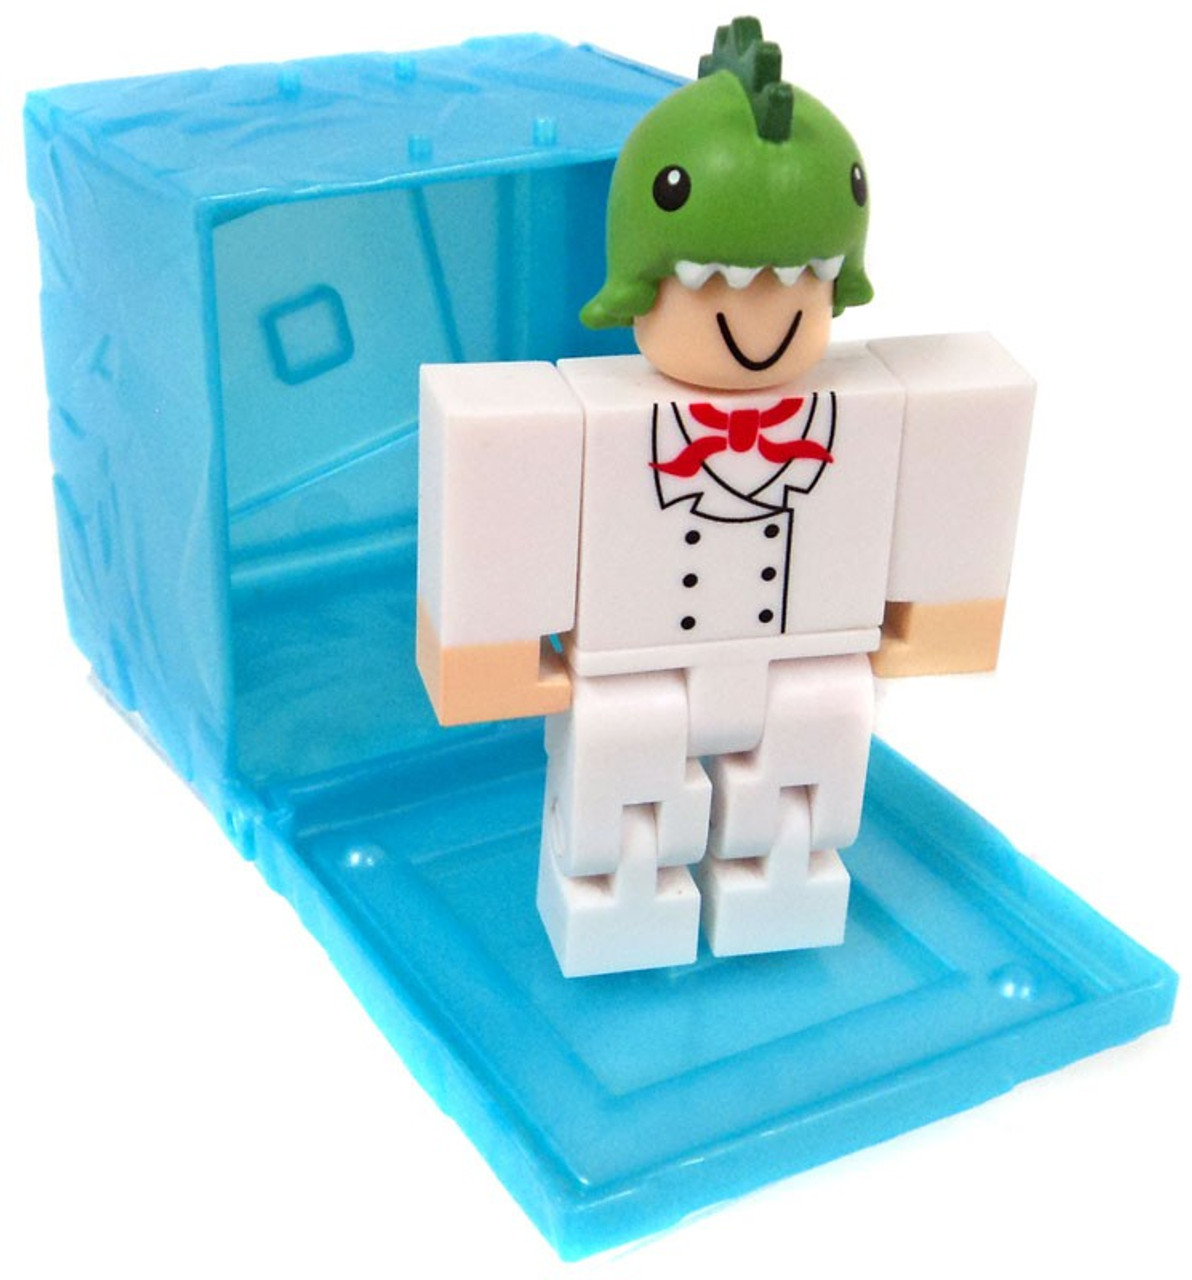 Roblox Red Series 3 Theme Park Tycoon Dino Vender 3 Mini Figure Blue Cube With Online Code Loose Jazwares Toywiz - code jurassic tycoon roblox